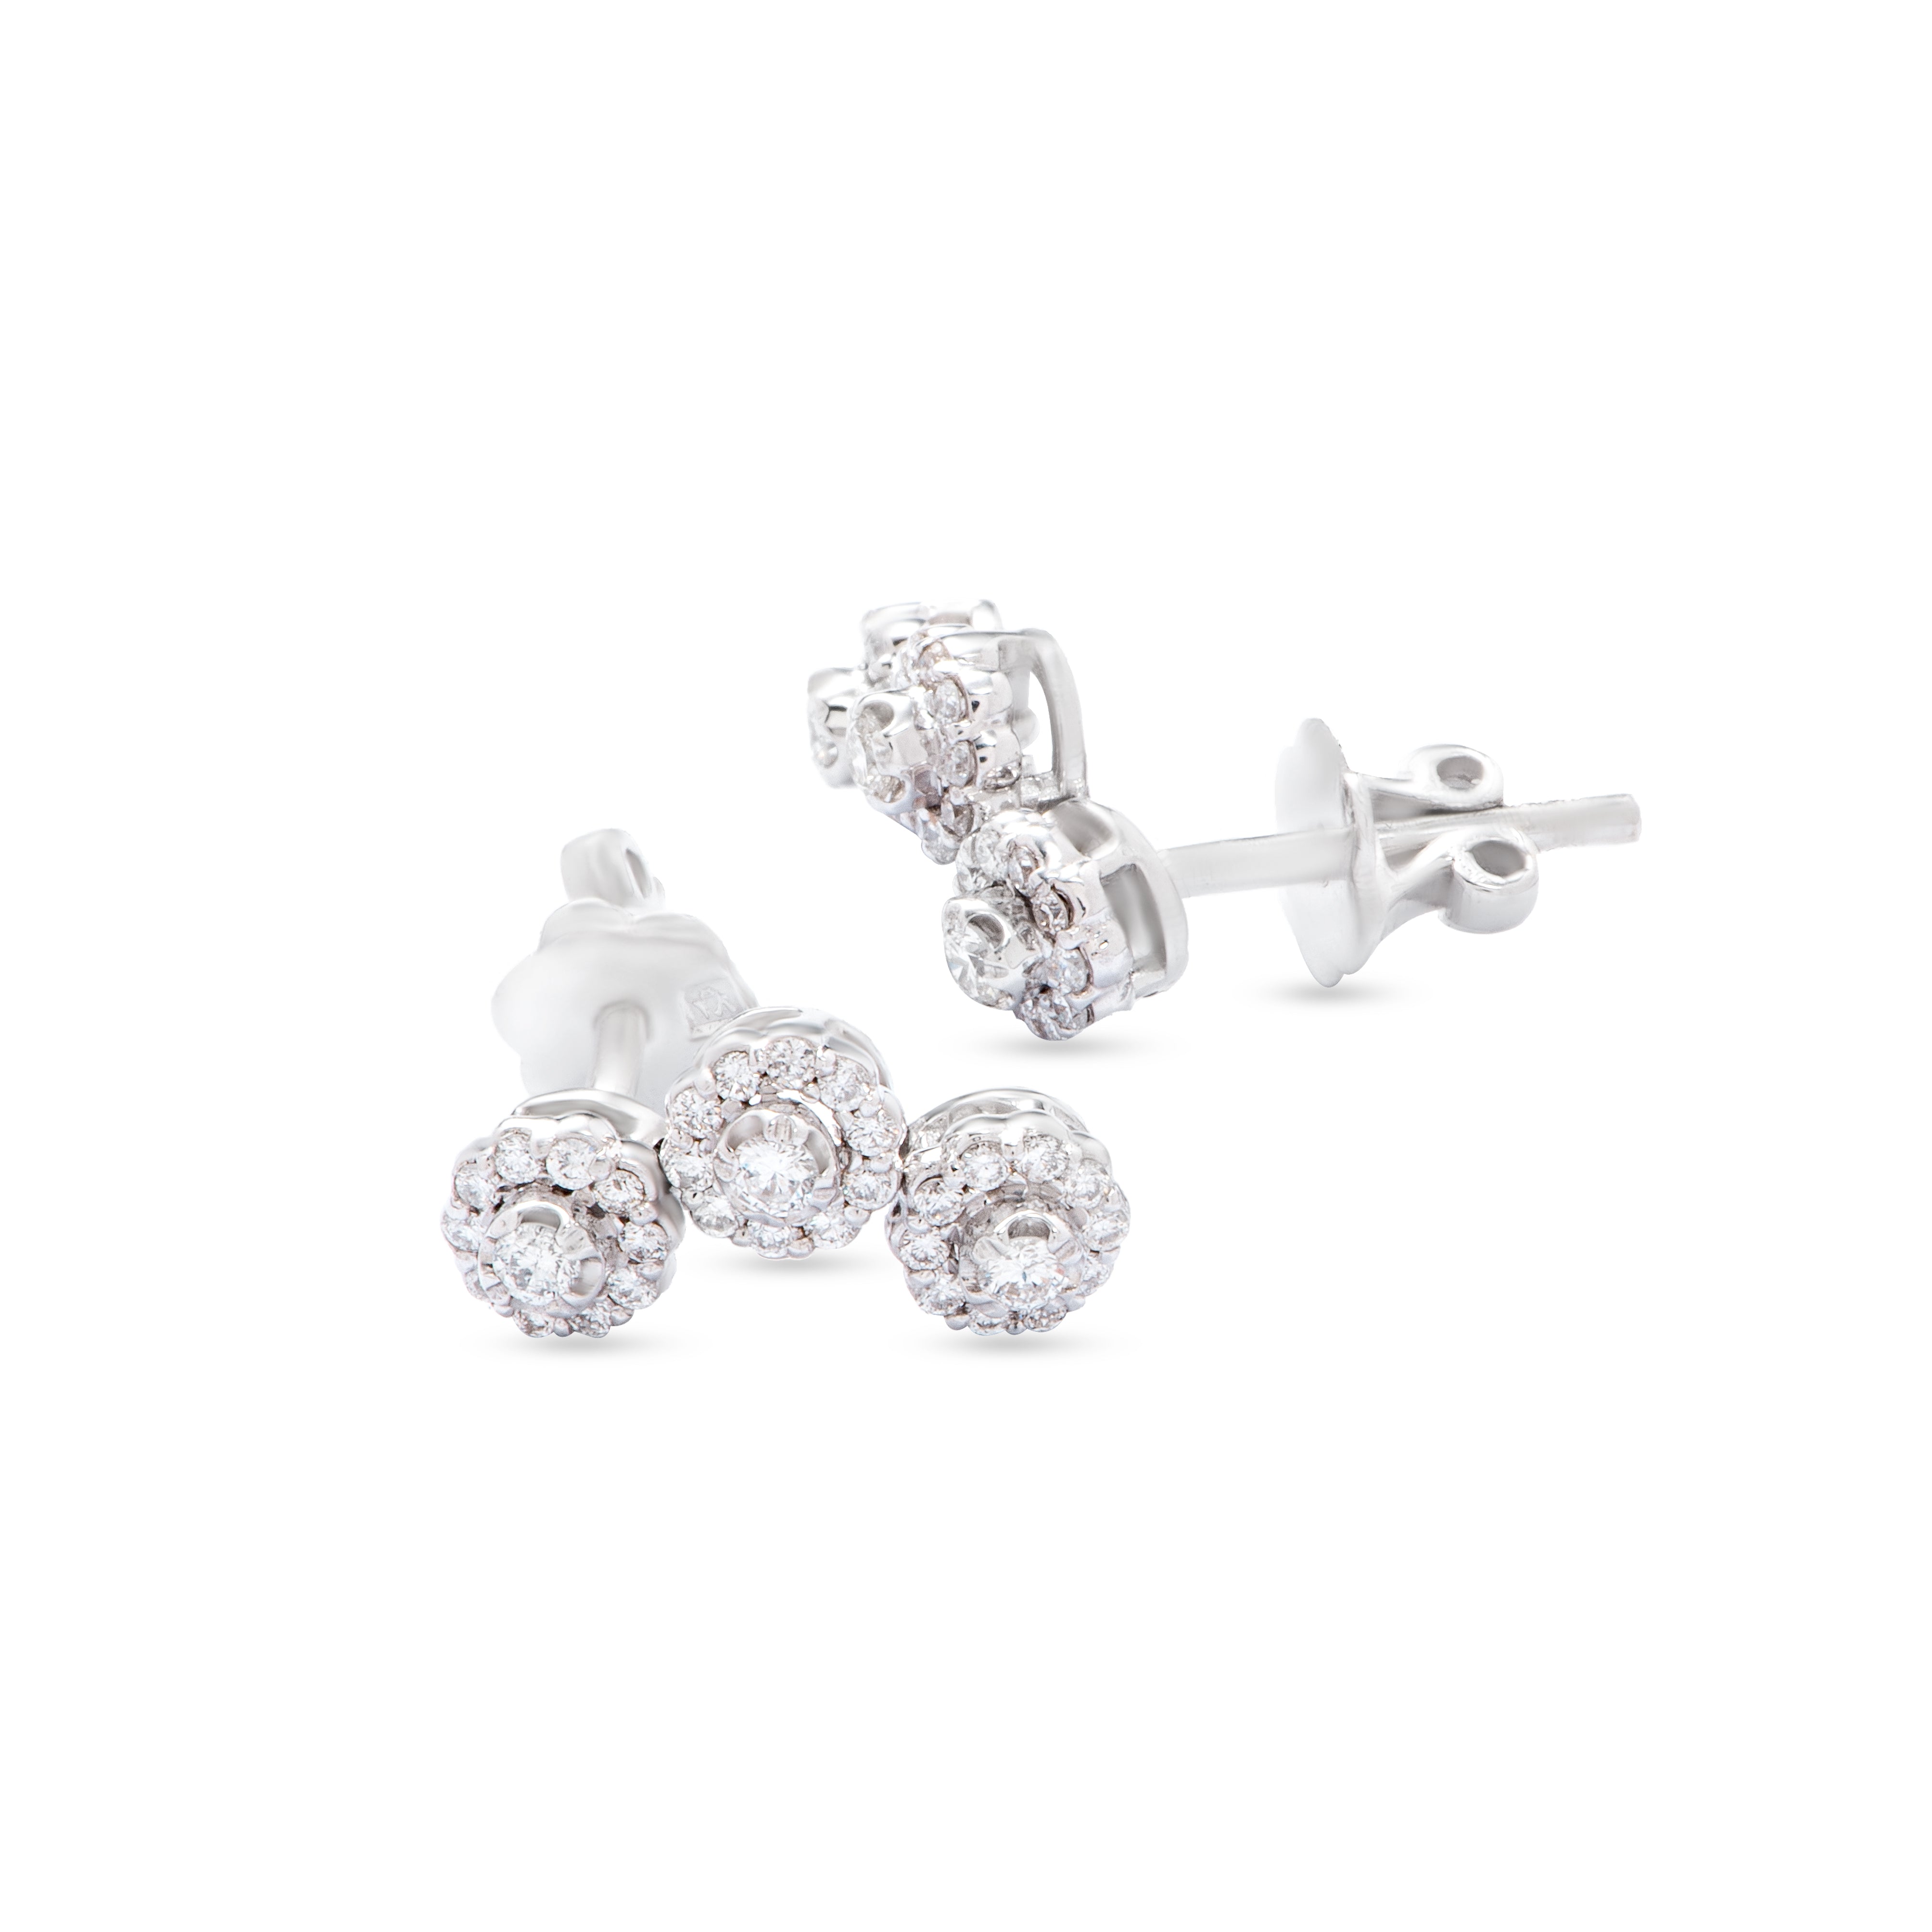 Shiny 3 Linked Round Diamonds Earring in White 18 K Gold - SIR654